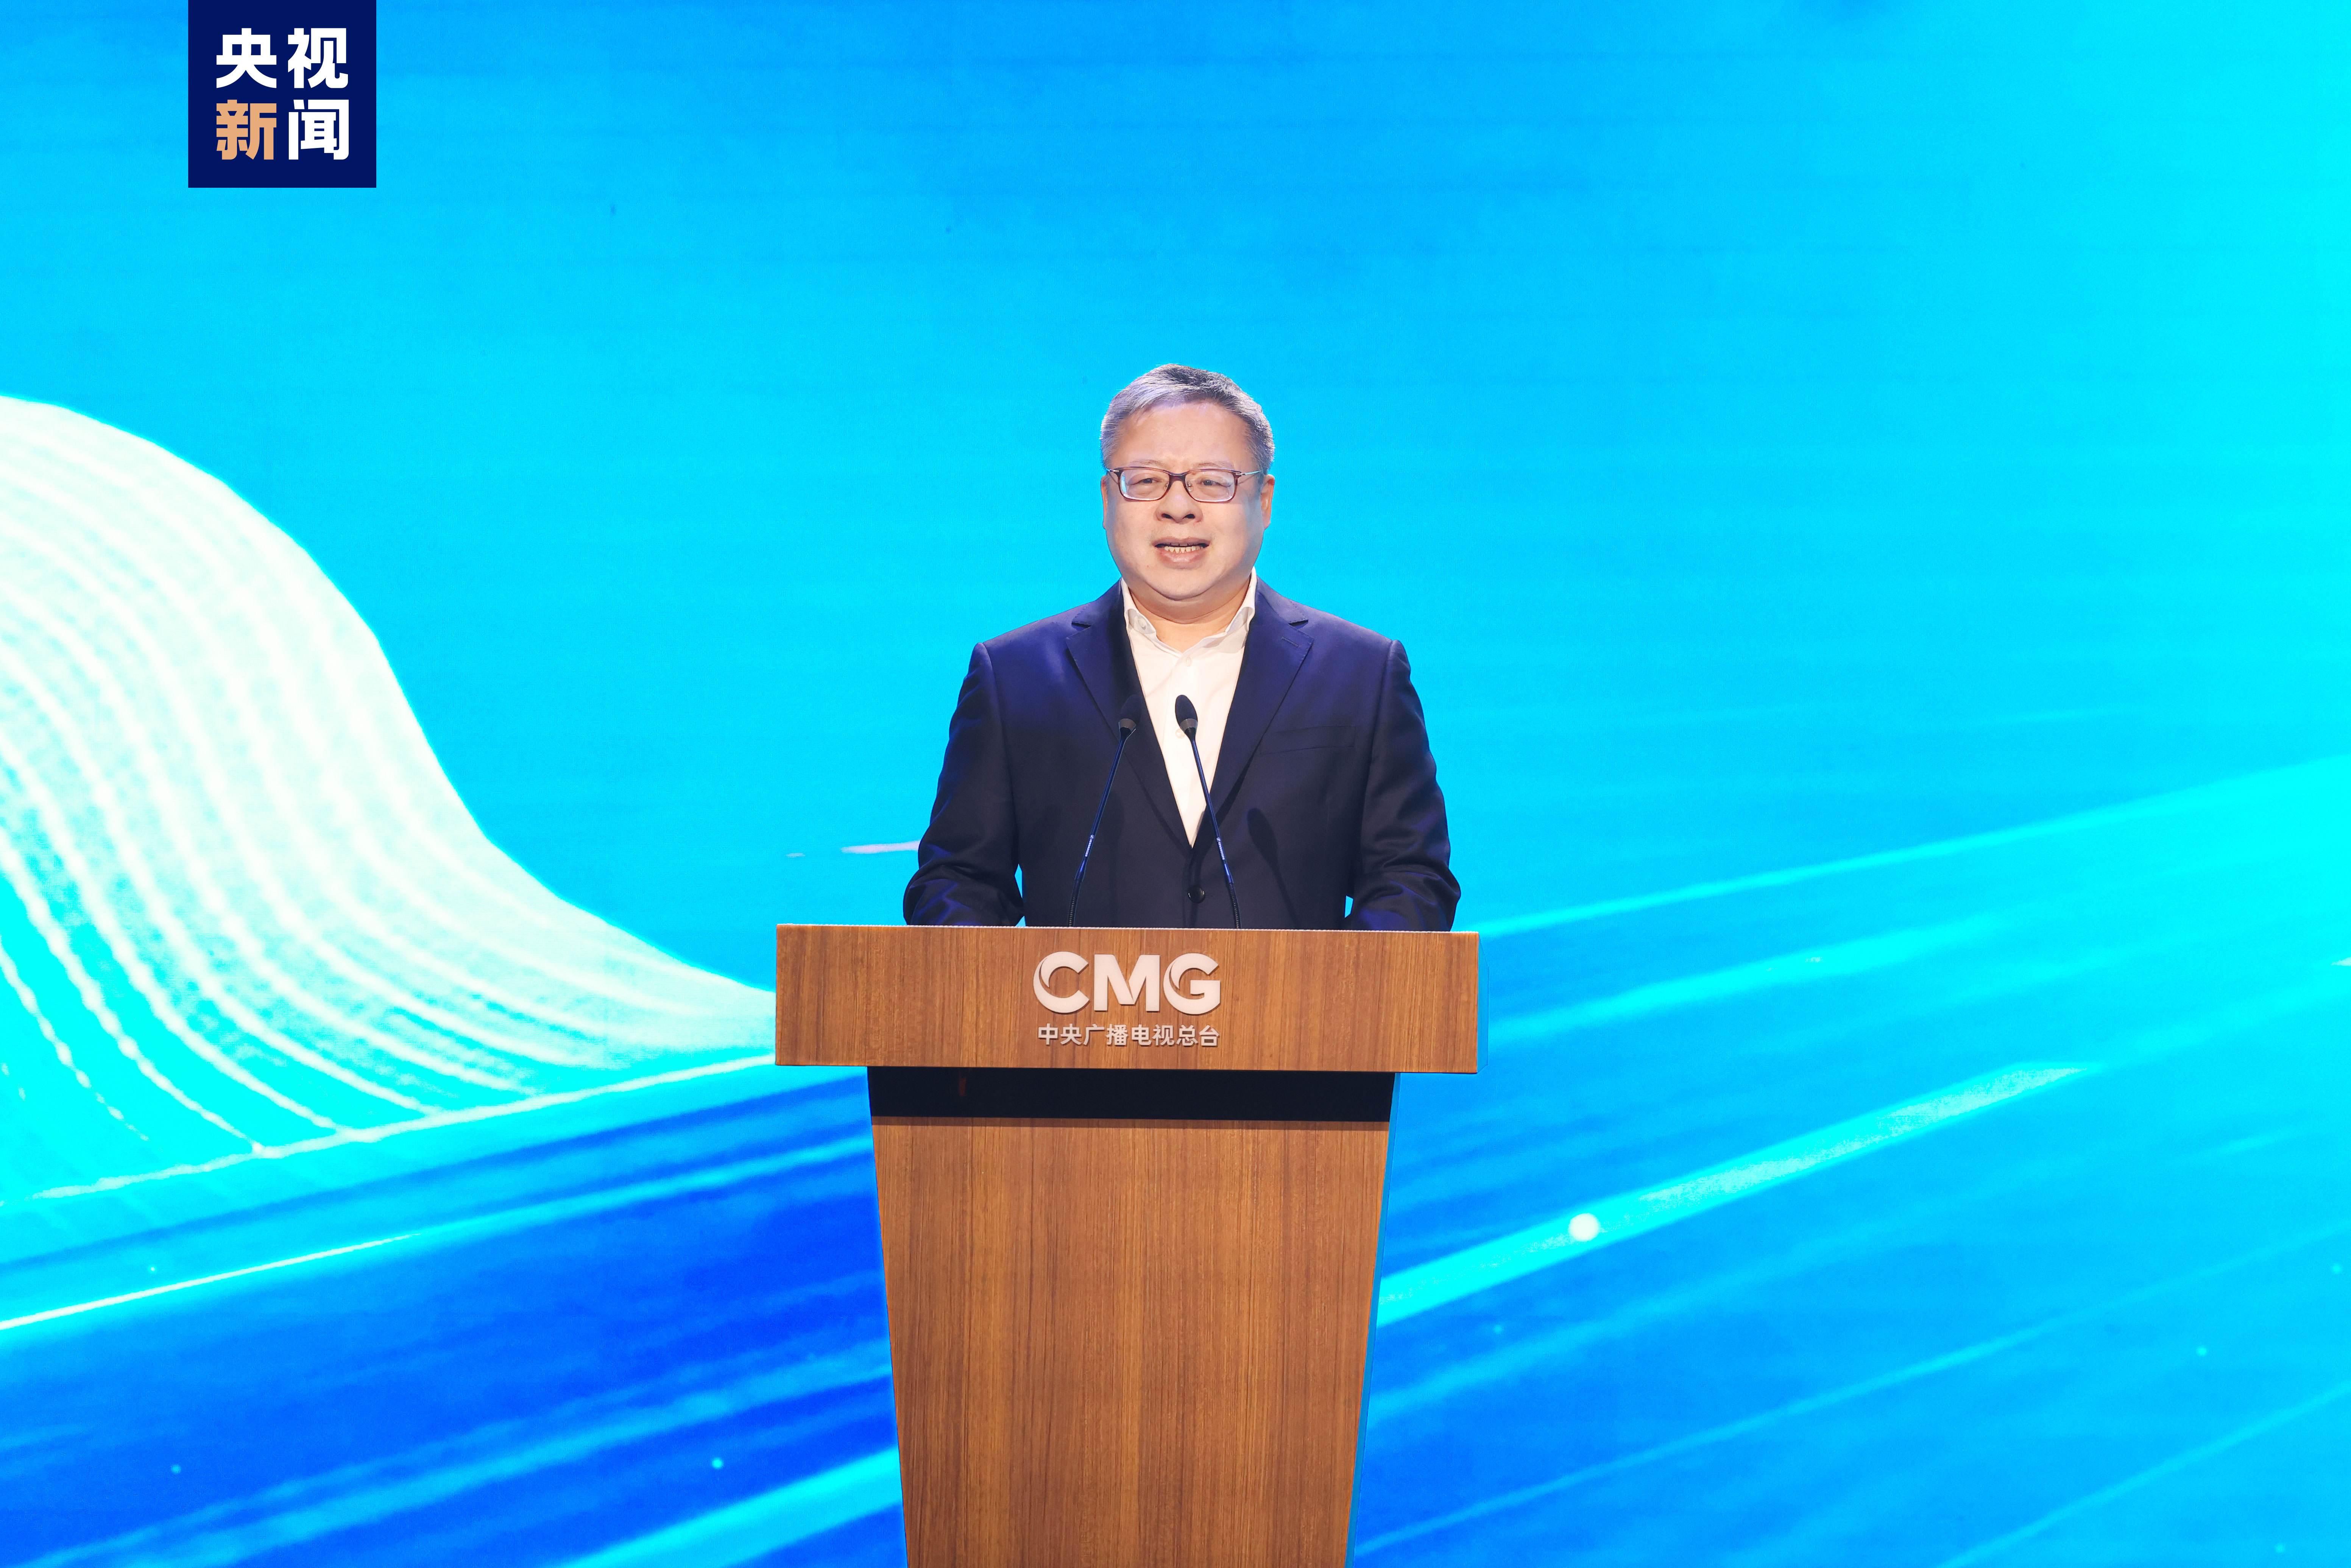 Peng Jianming, a member of the CMG editorial board and general manager of the general manager's office, delivers a speech during a grand ceremony unveiling CMG's micro-dramas cooperation plan named 